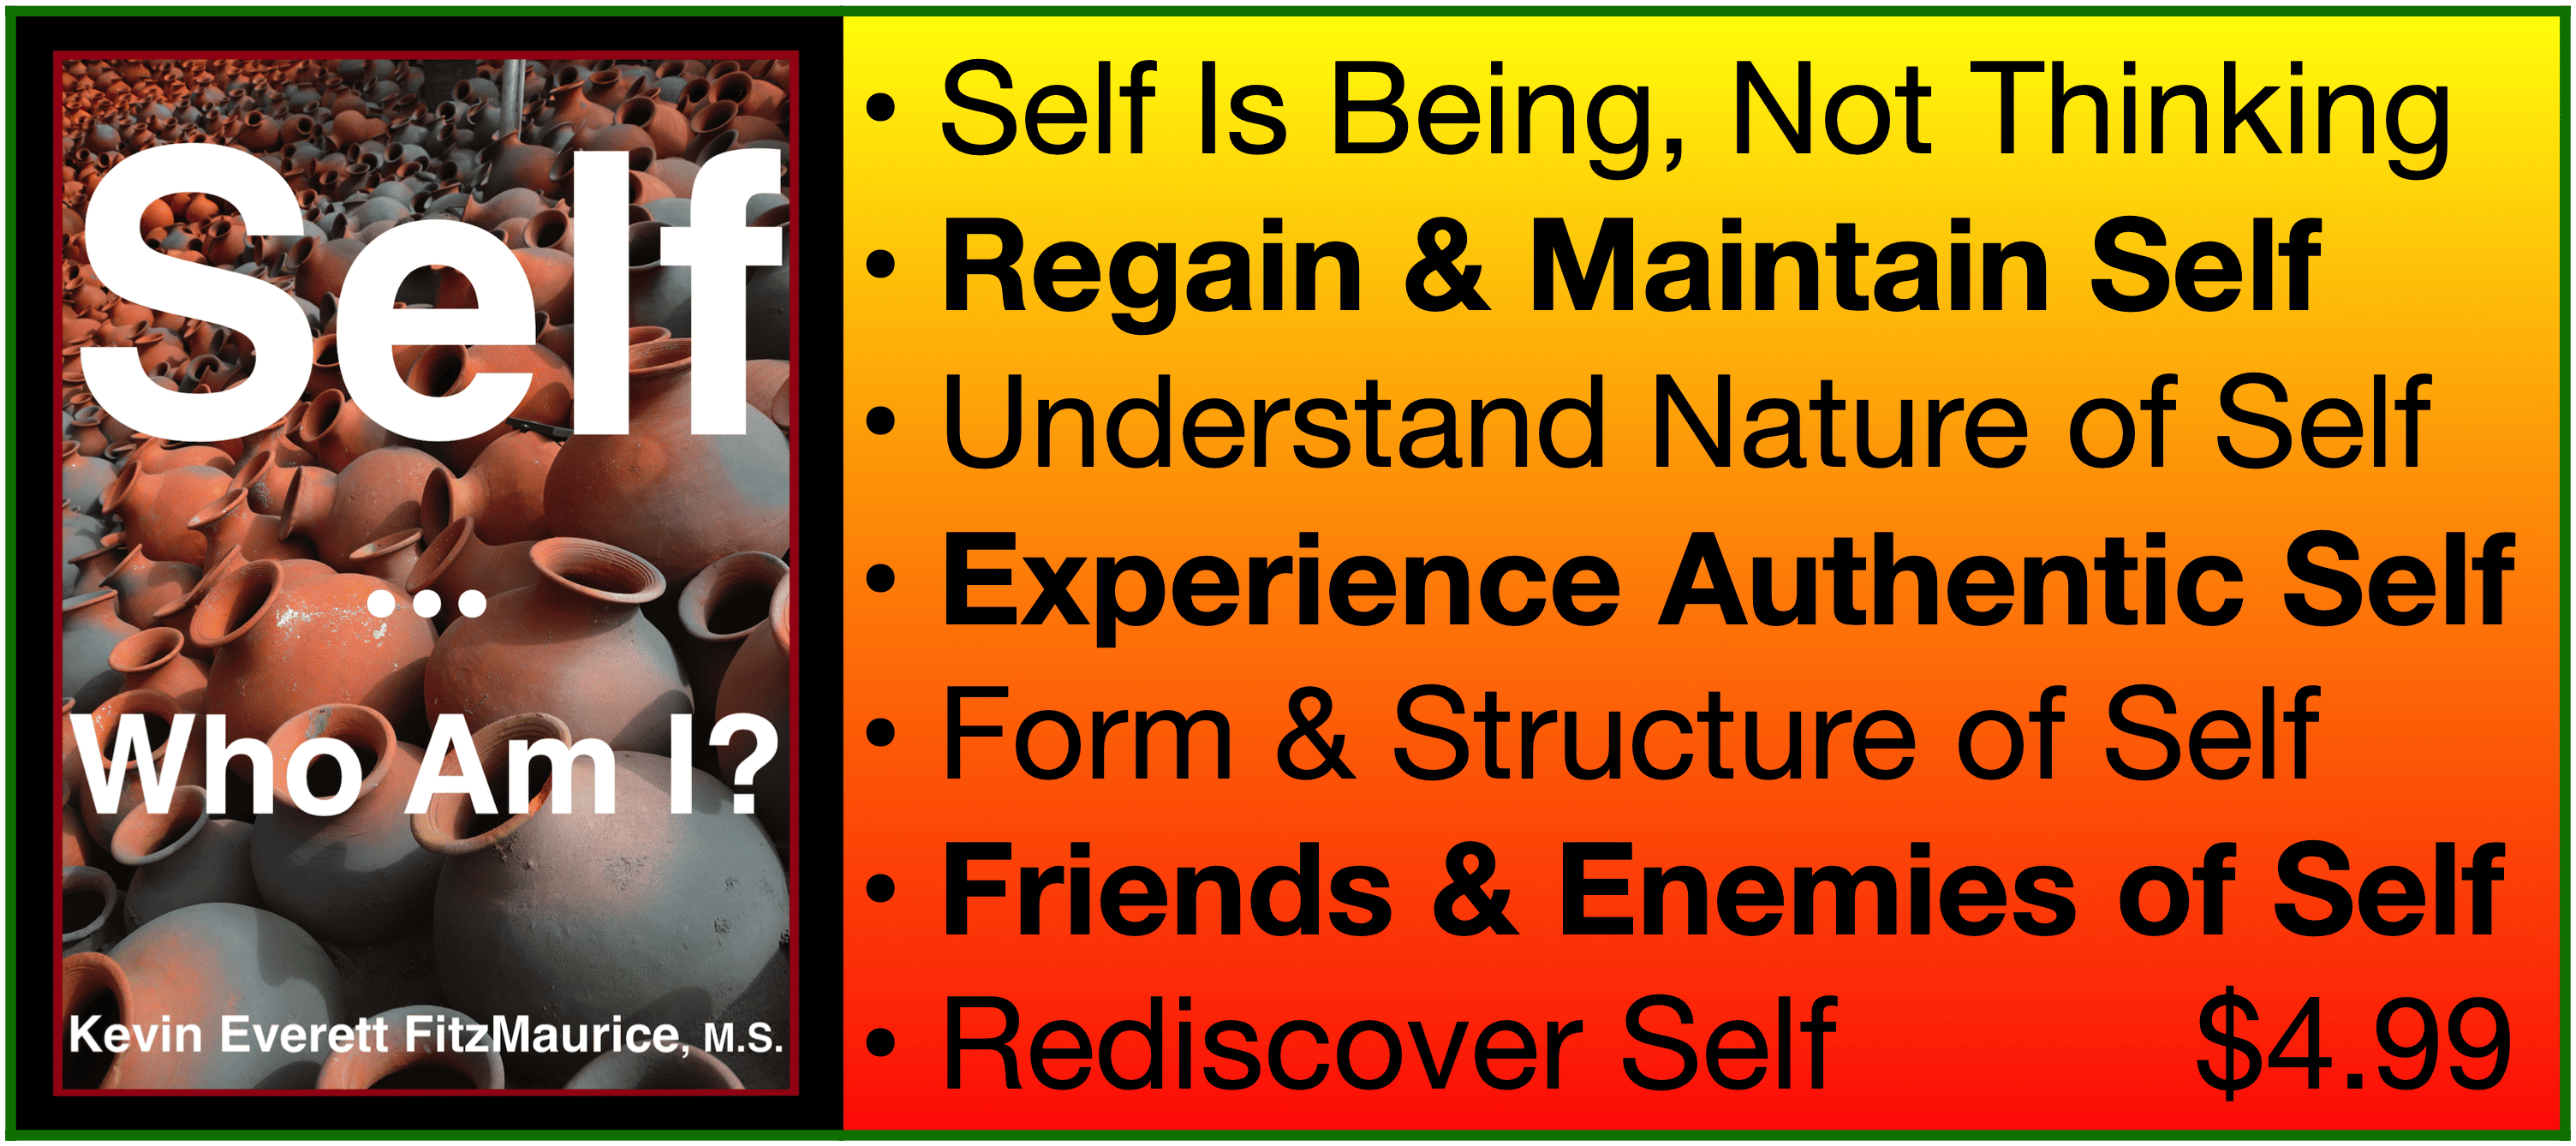 Self: Who Am I? reasons to buy the book